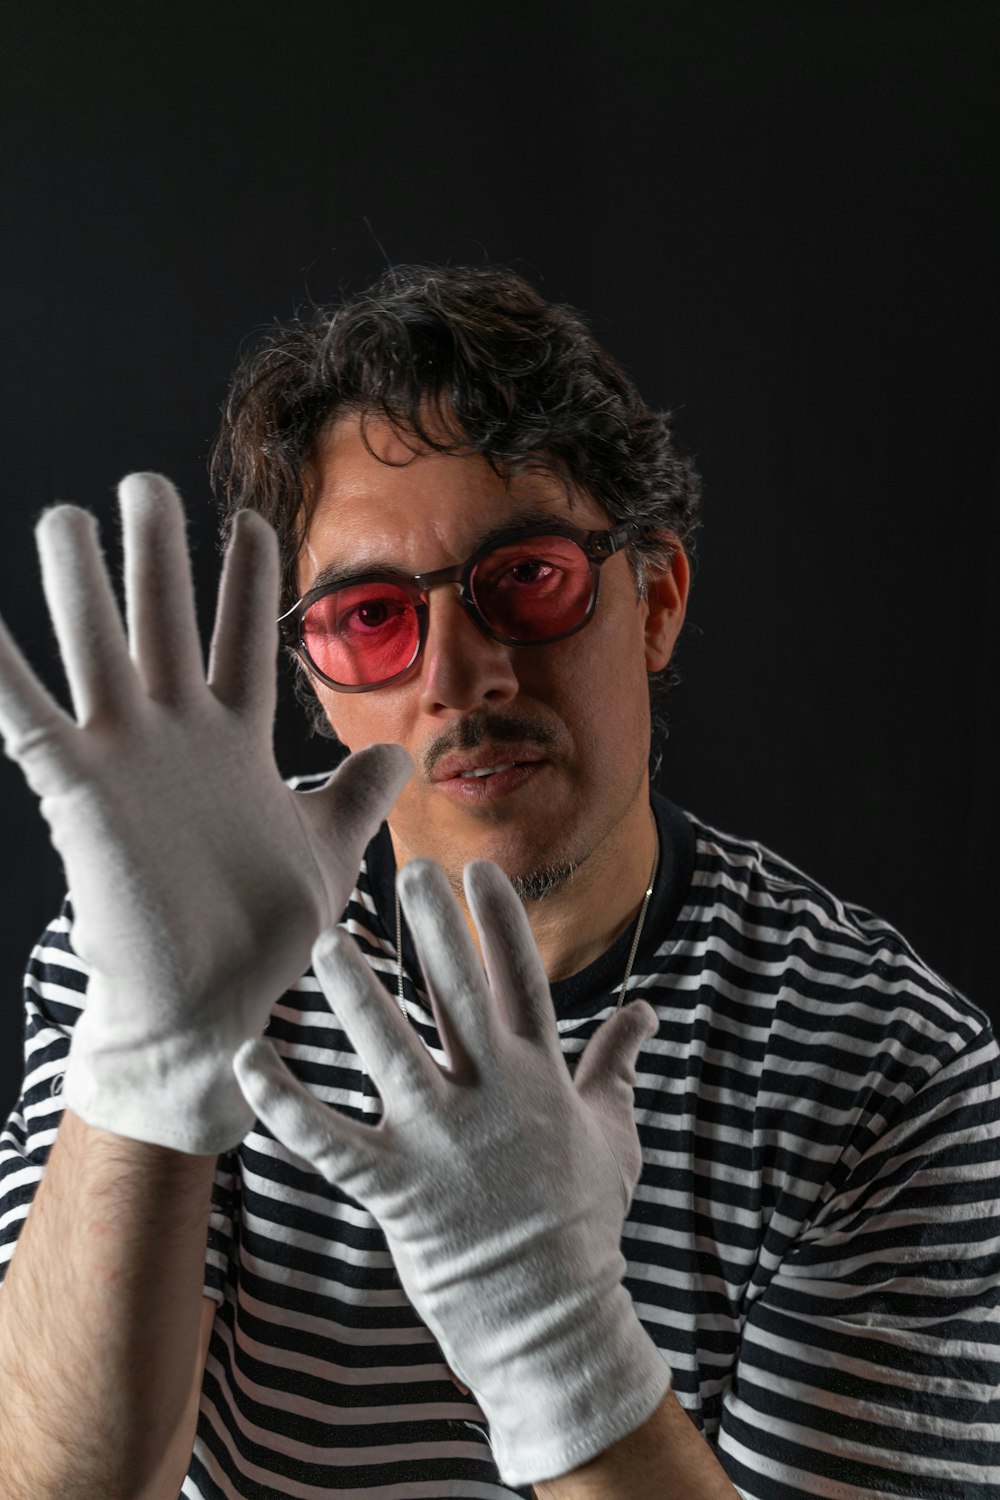 a man in a striped shirt and white gloves